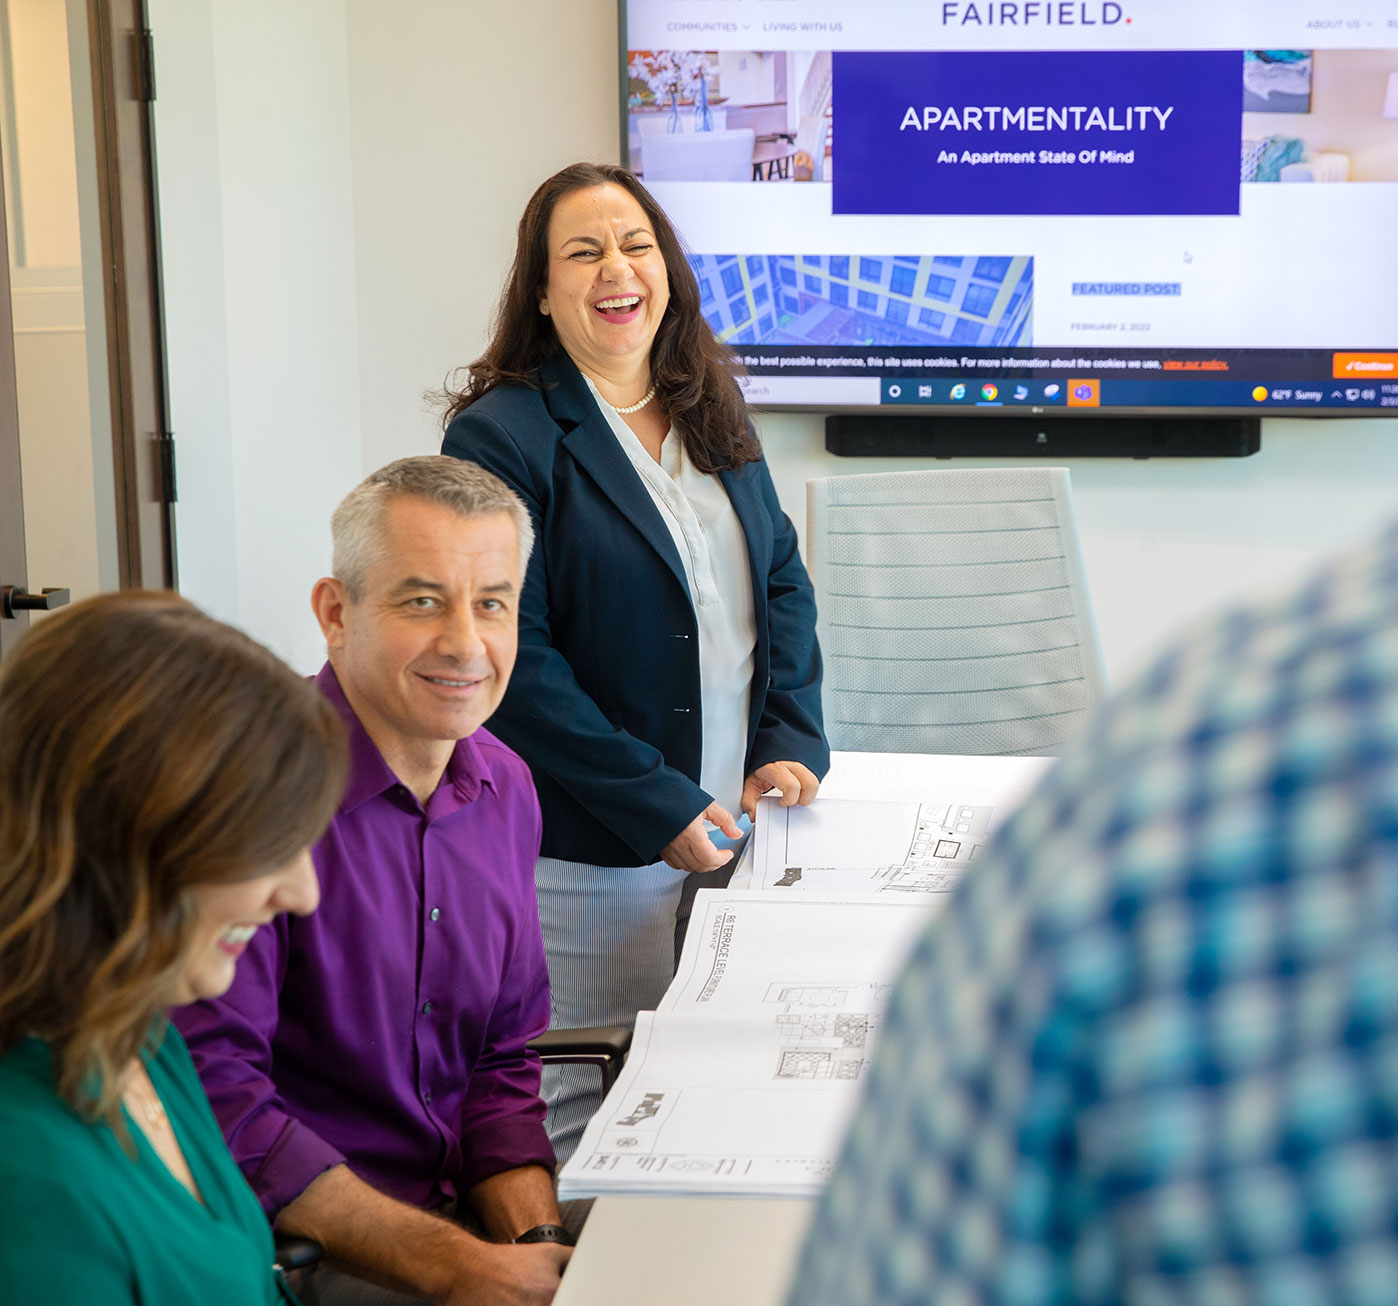 A group of associates laugh during a discussion while looking at construction plan during a meeting in a conference room with a television screen in the background.